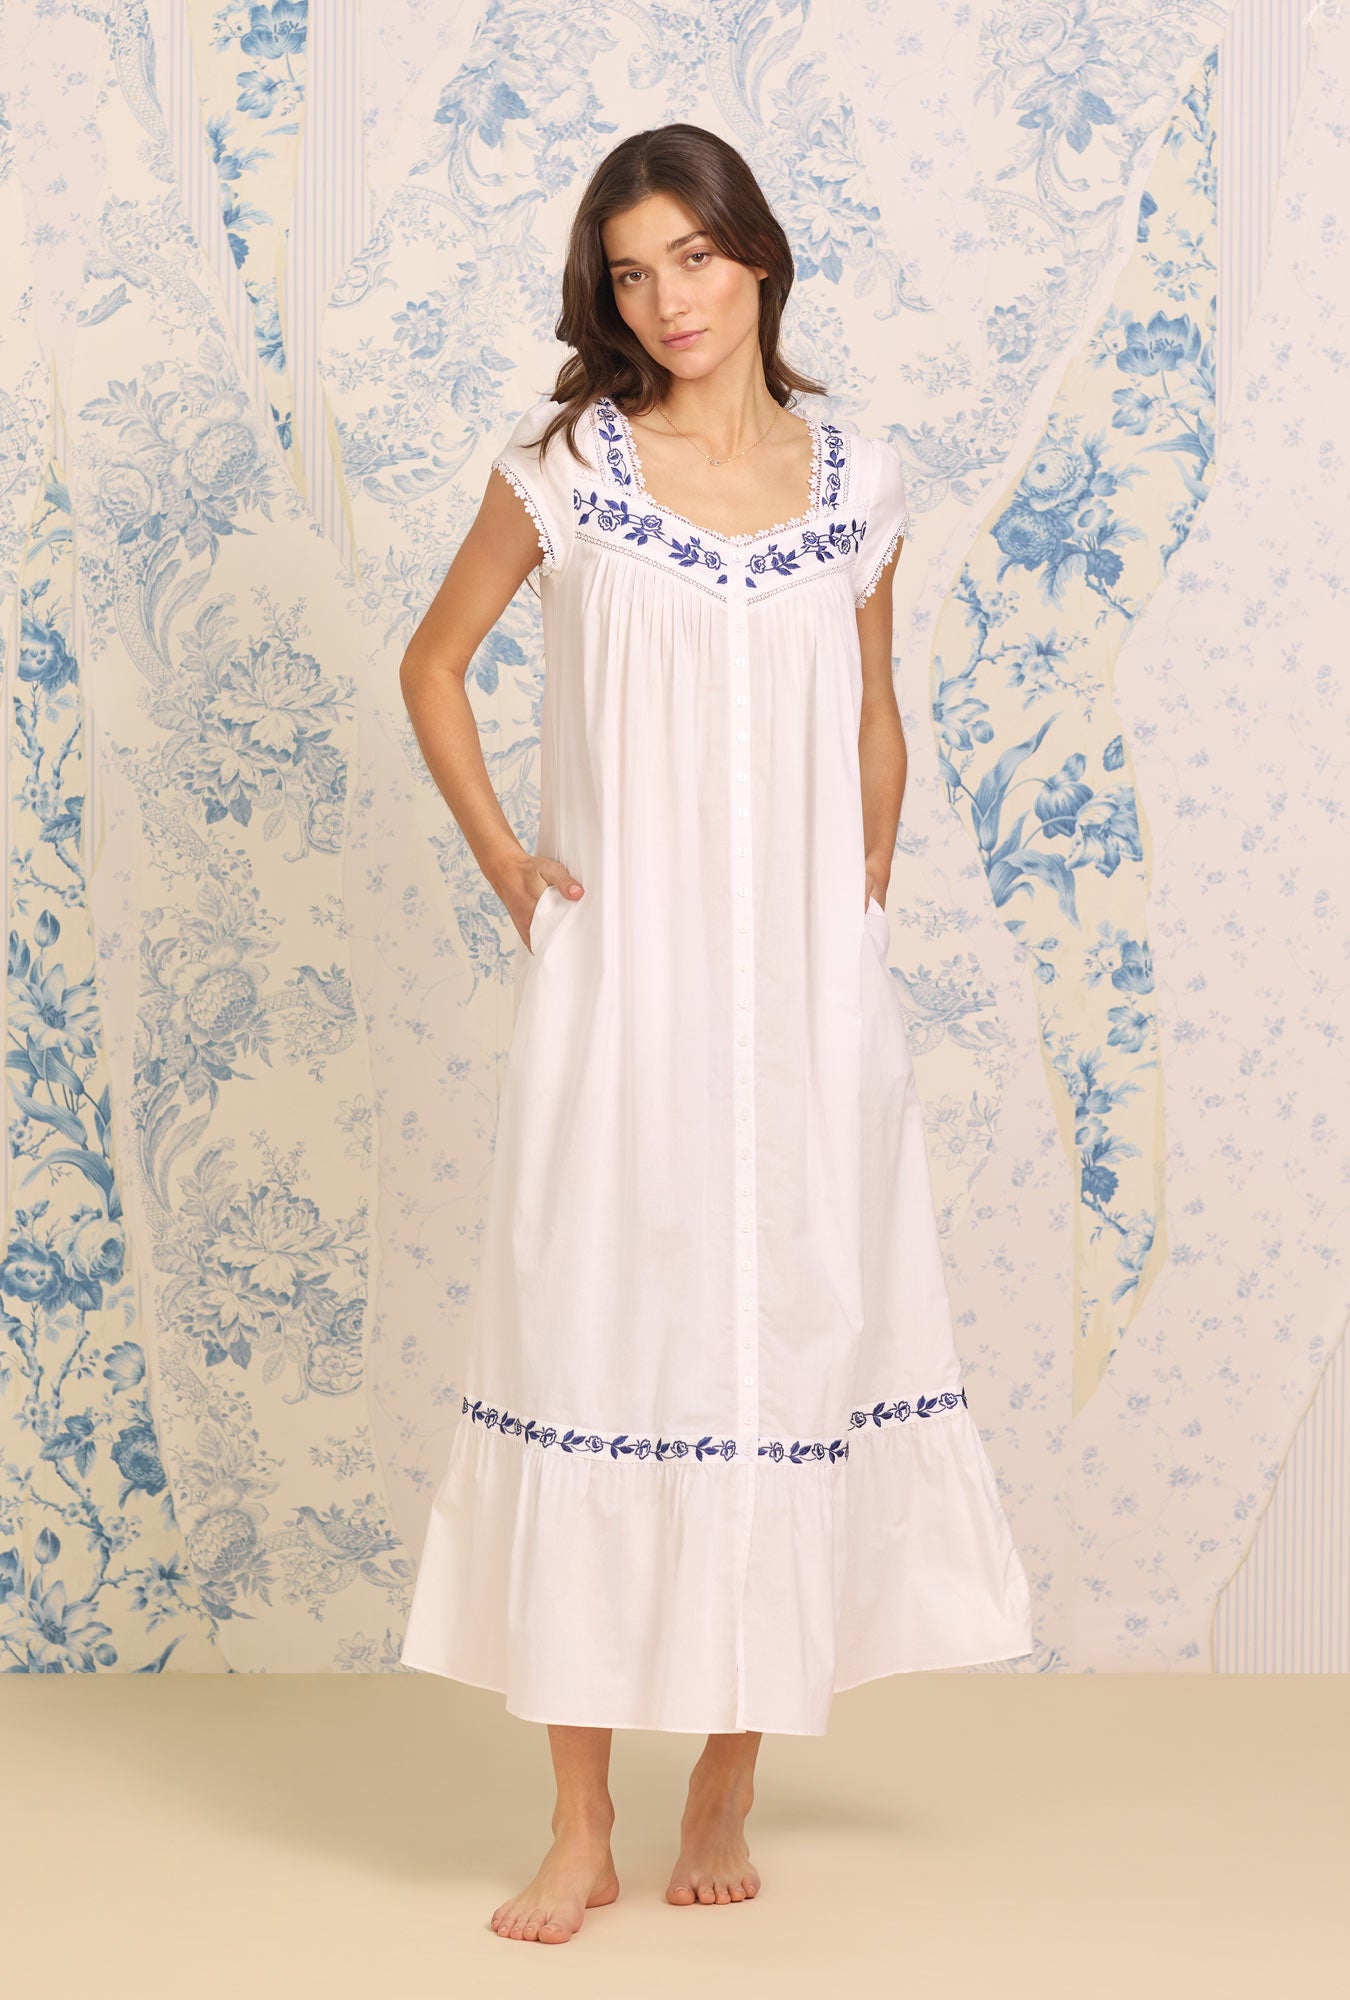 A lady wearing white sleeveless  Embroidered Cotton Robe with Dune Beach print